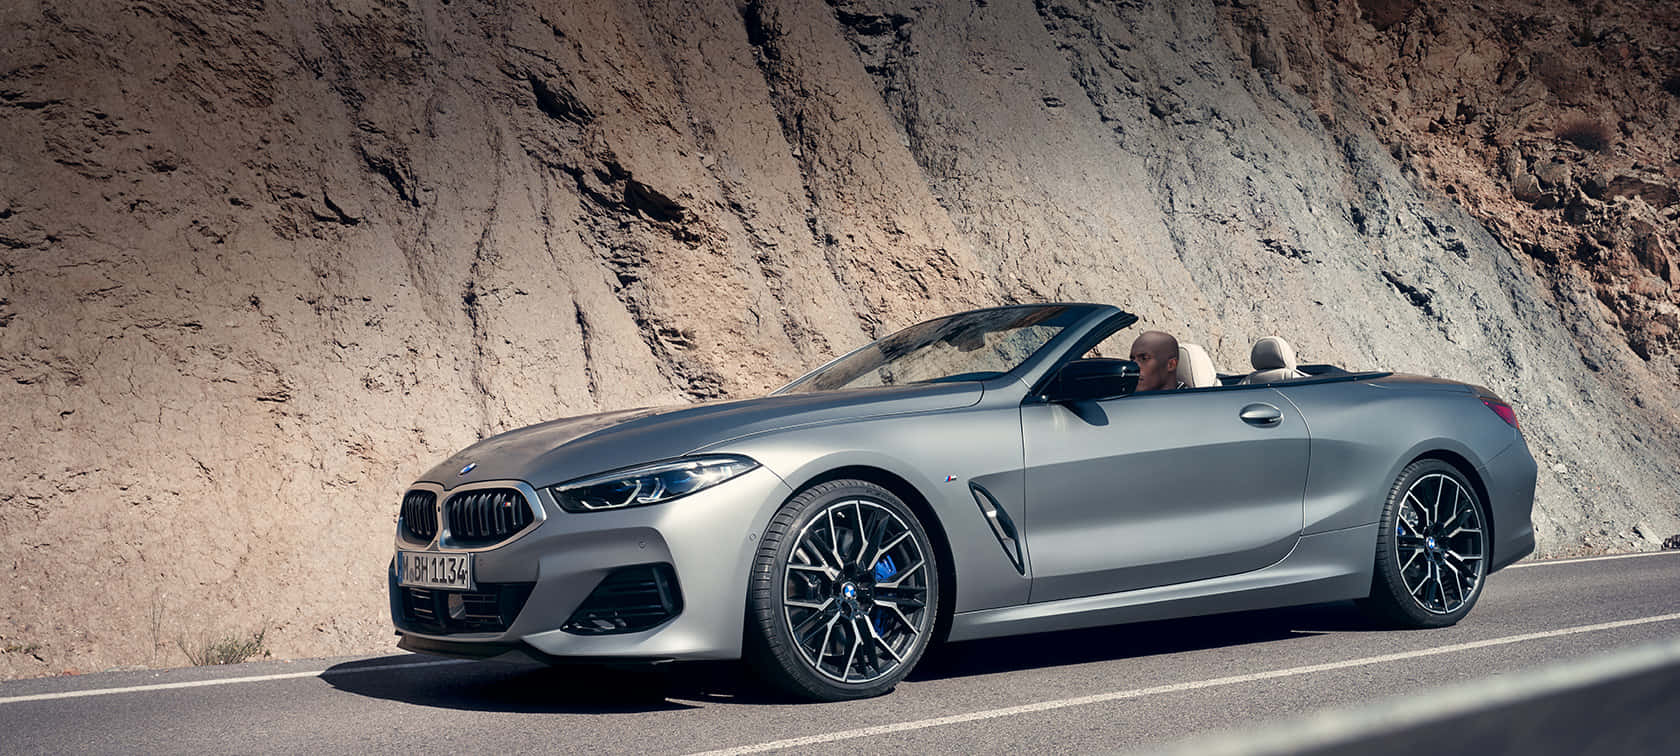 No matter the ride, the BMW is always a smooth drive.